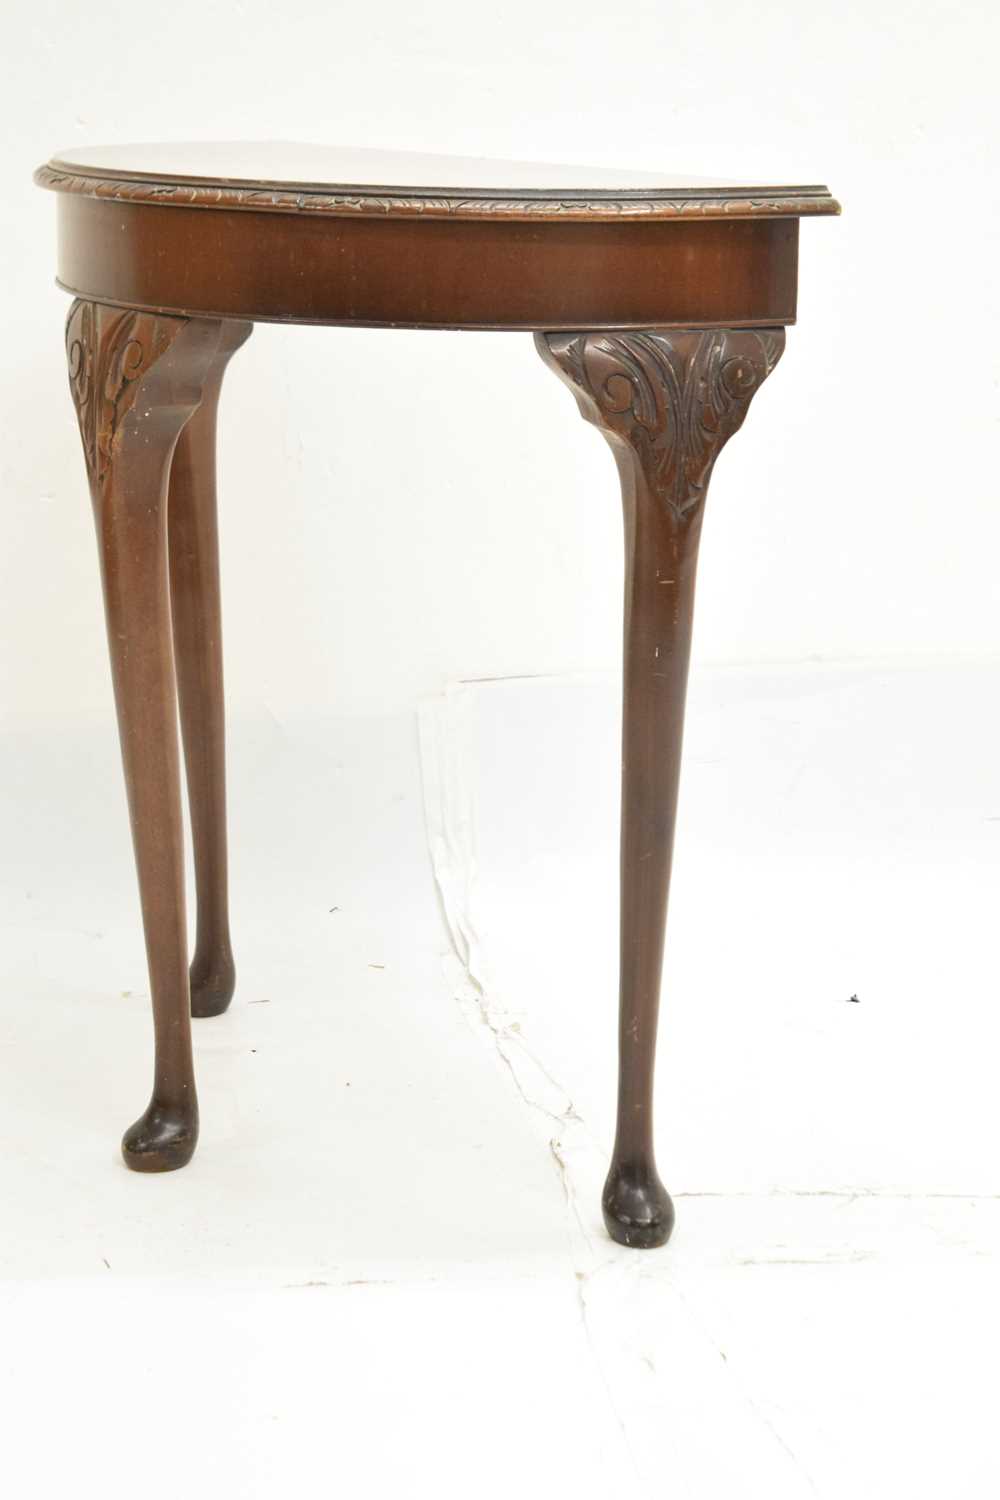 Mid 20th century walnut demi-lune console table - Image 4 of 5